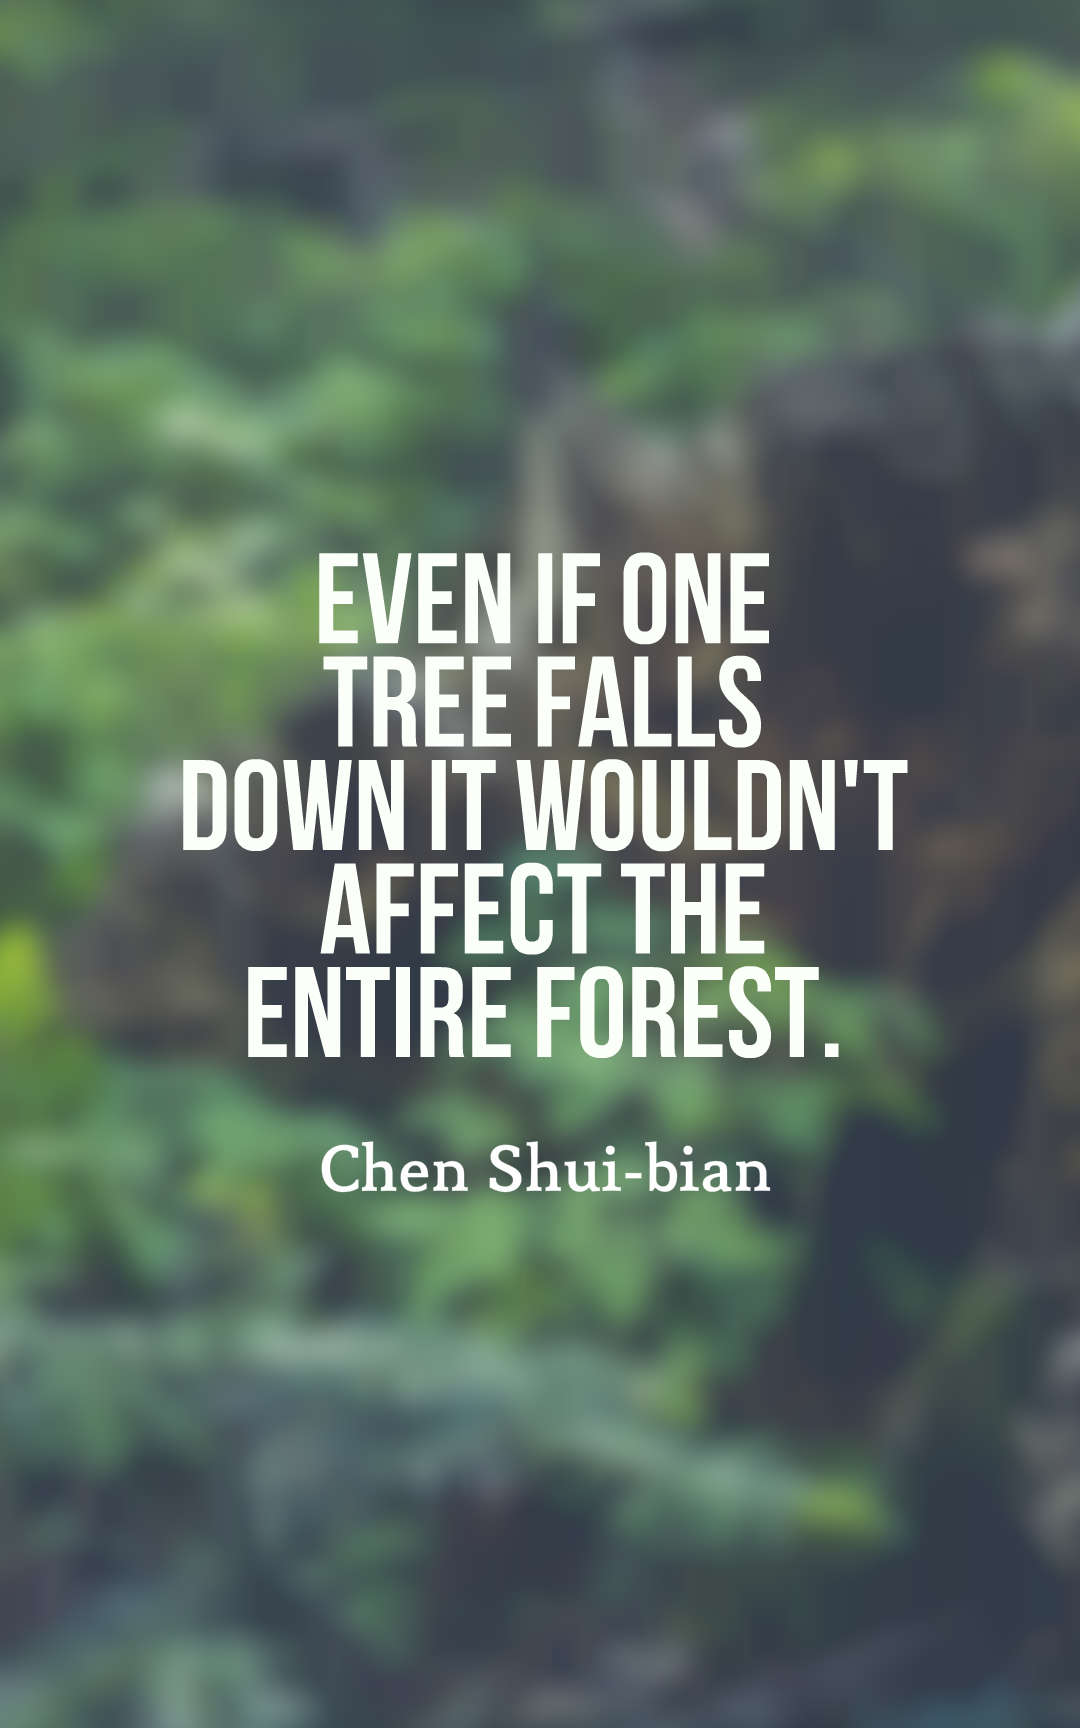 Even if one tree falls down it wouldn't affect the entire forest.